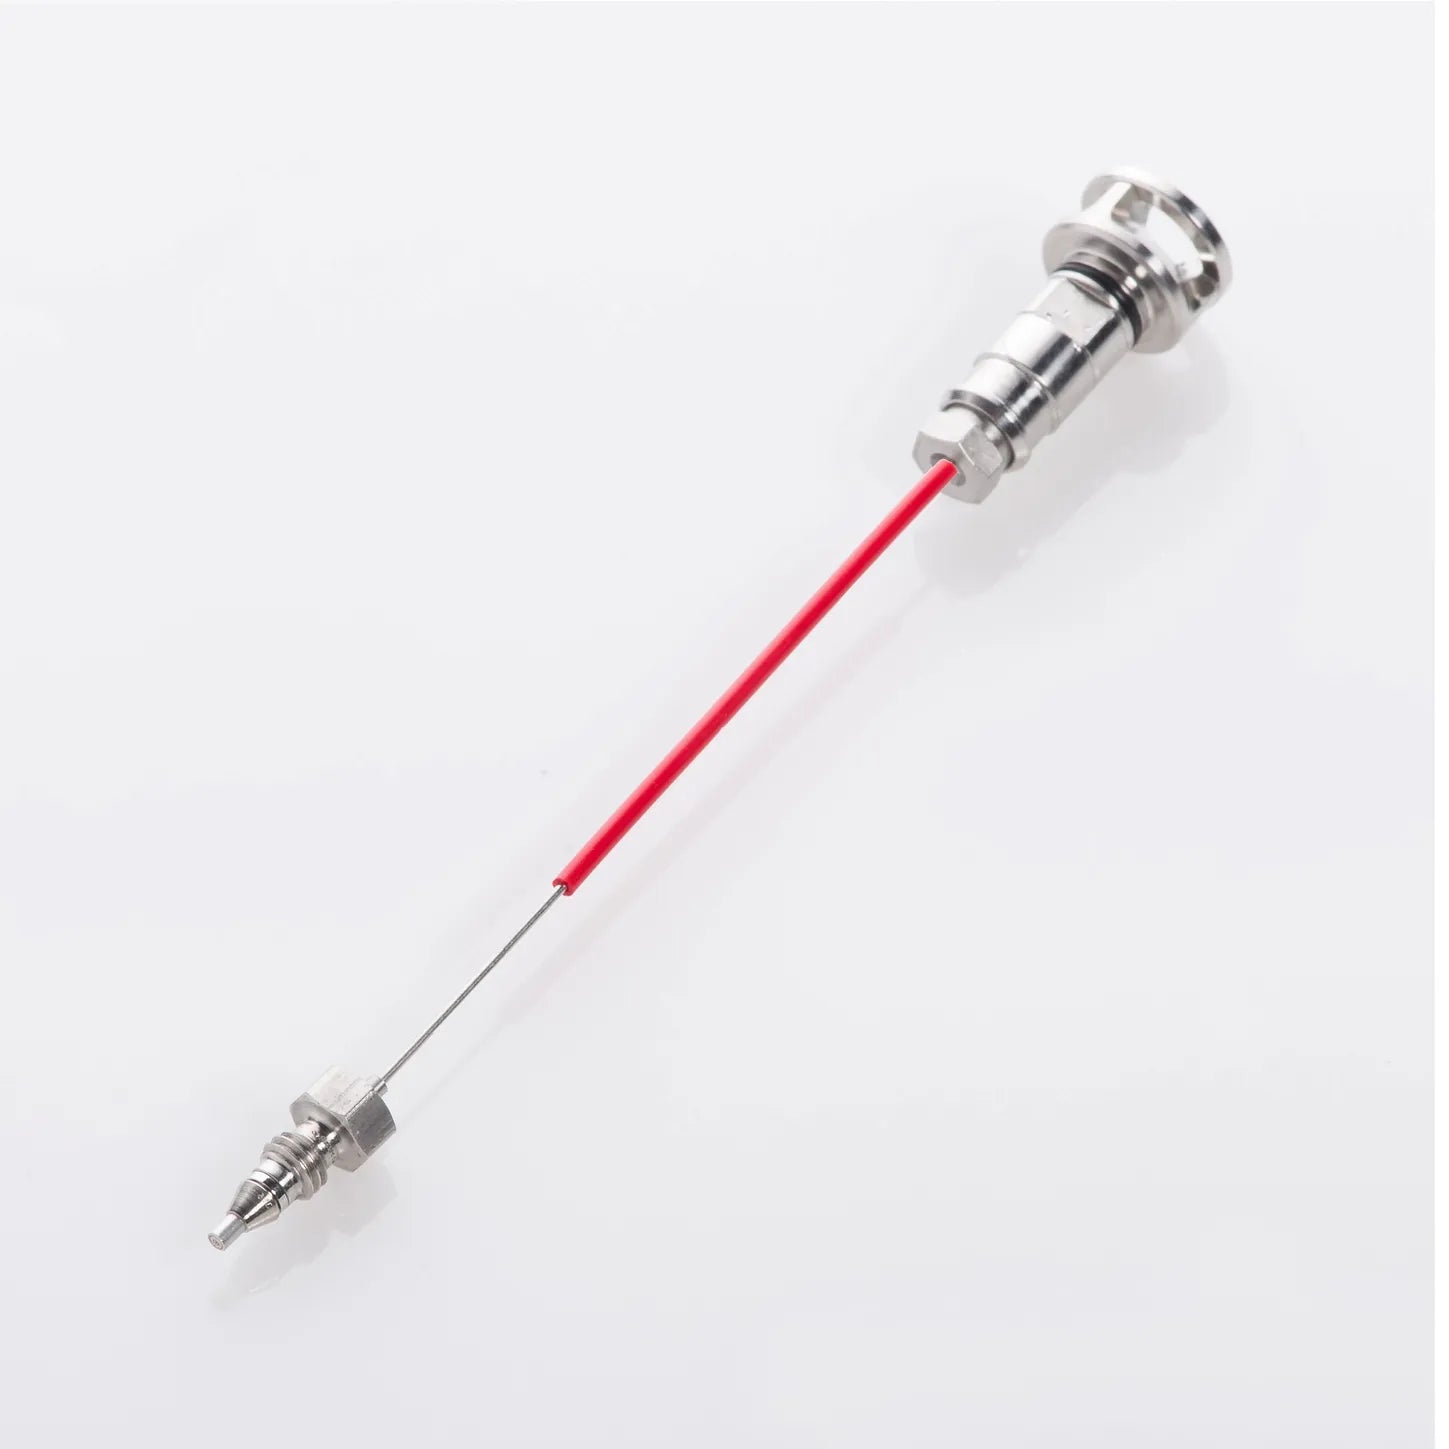 Needle Seat, 0.12mm ID, 0.8mm OD, PEEK™, 600 bar, Comparable to Agilent # G1367-87012